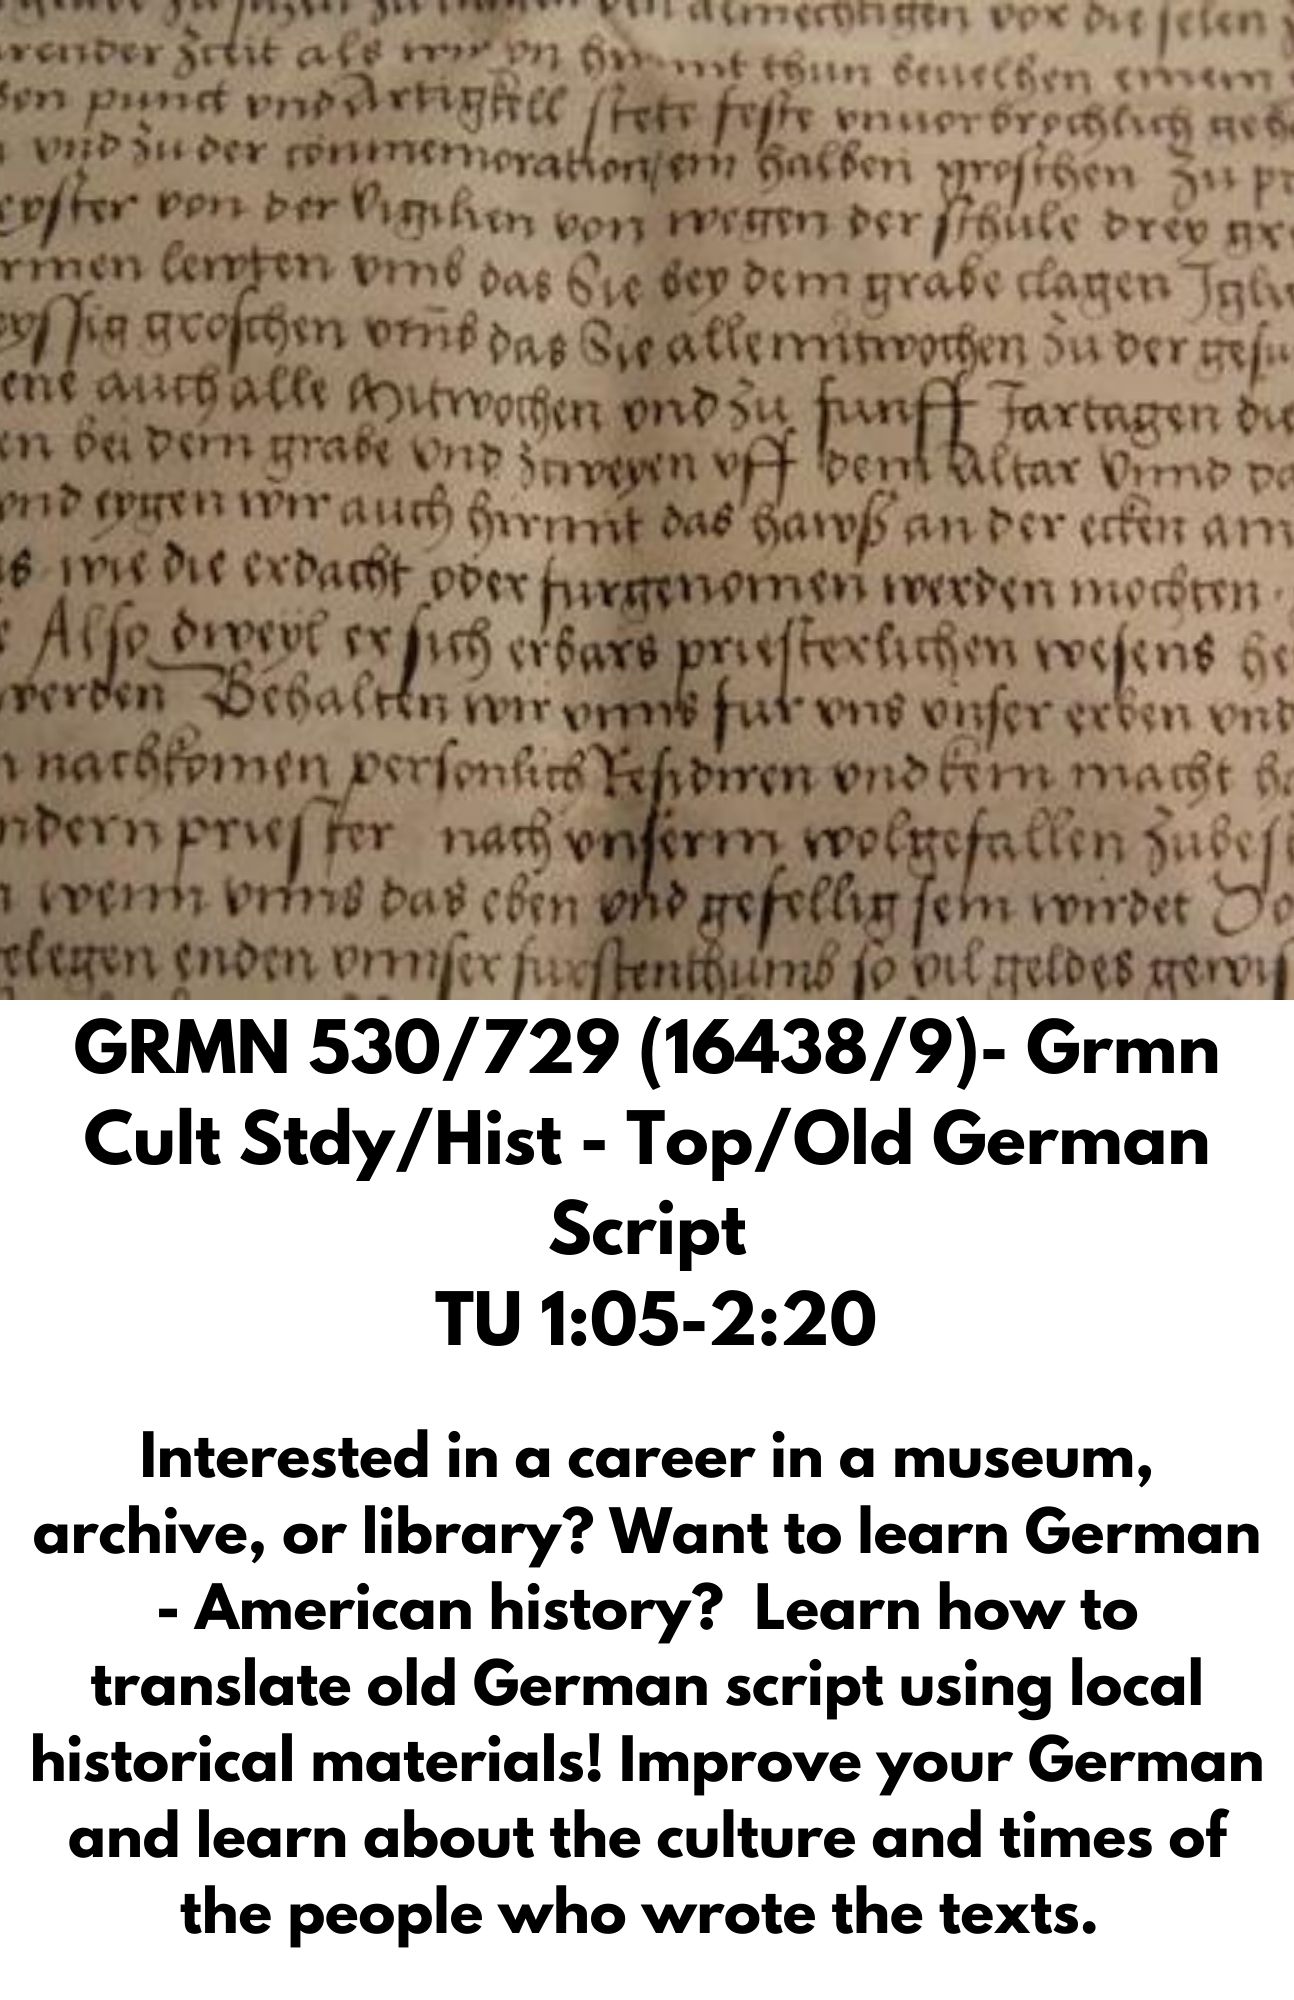 GRMN 530/729 (16438/9)- Grmn Cult Stdy/Hist - Top/Old German Script  TU 1:05-2:20  Interested in a career in a museum, archive, or library? Want to learn German - American history?  Learn how to translate old German script using local historical materials! Improve your German and learn about the culture and times of the people who wrote the texts.